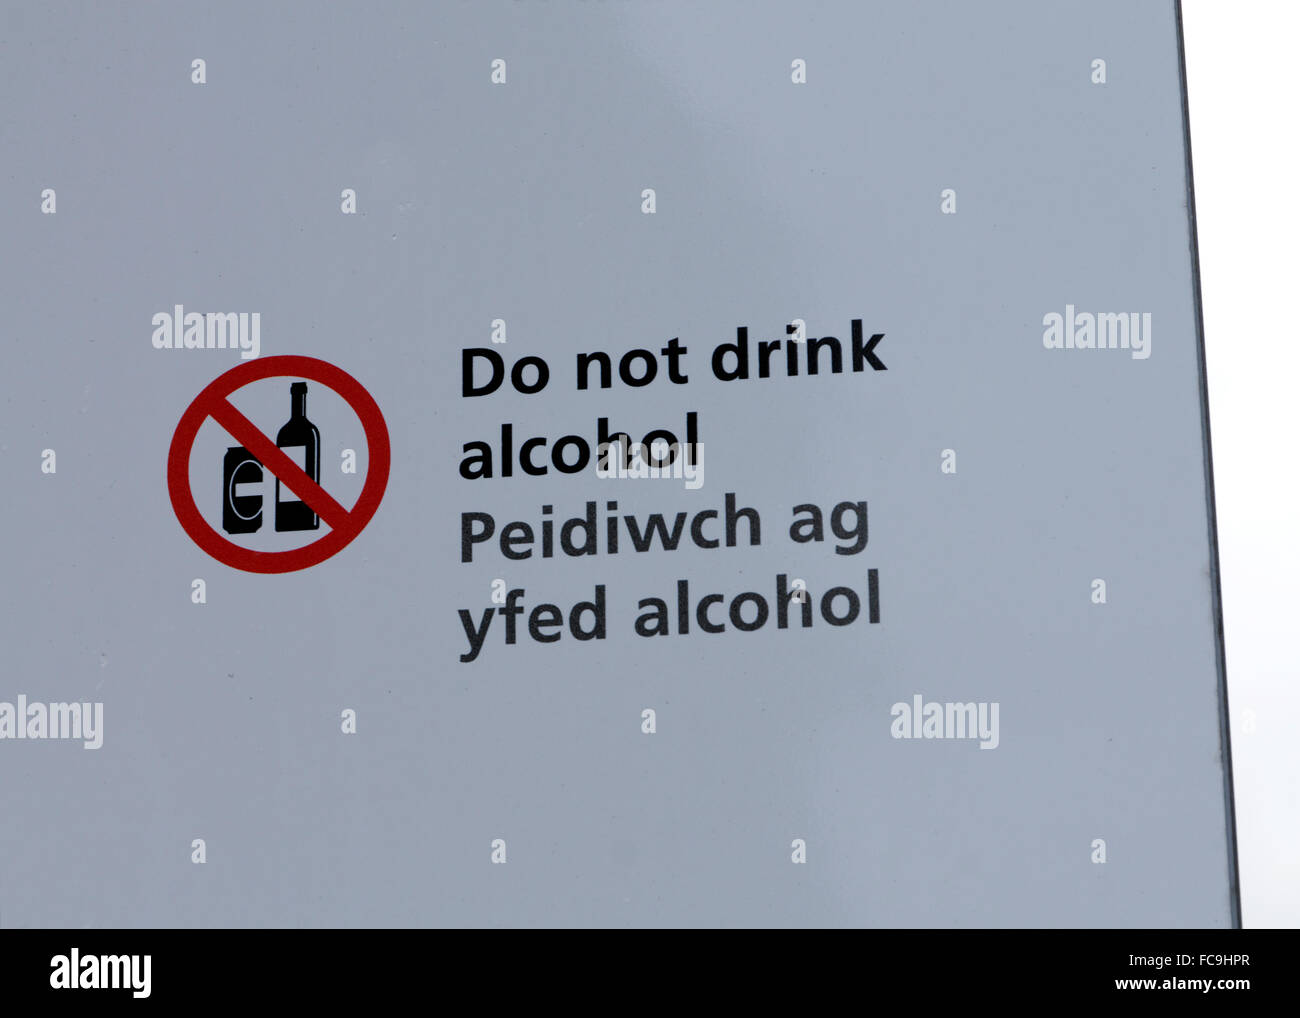 Do not drink alcohol sign in English and Welsh, Barry Island, South Wales, UK. Stock Photo